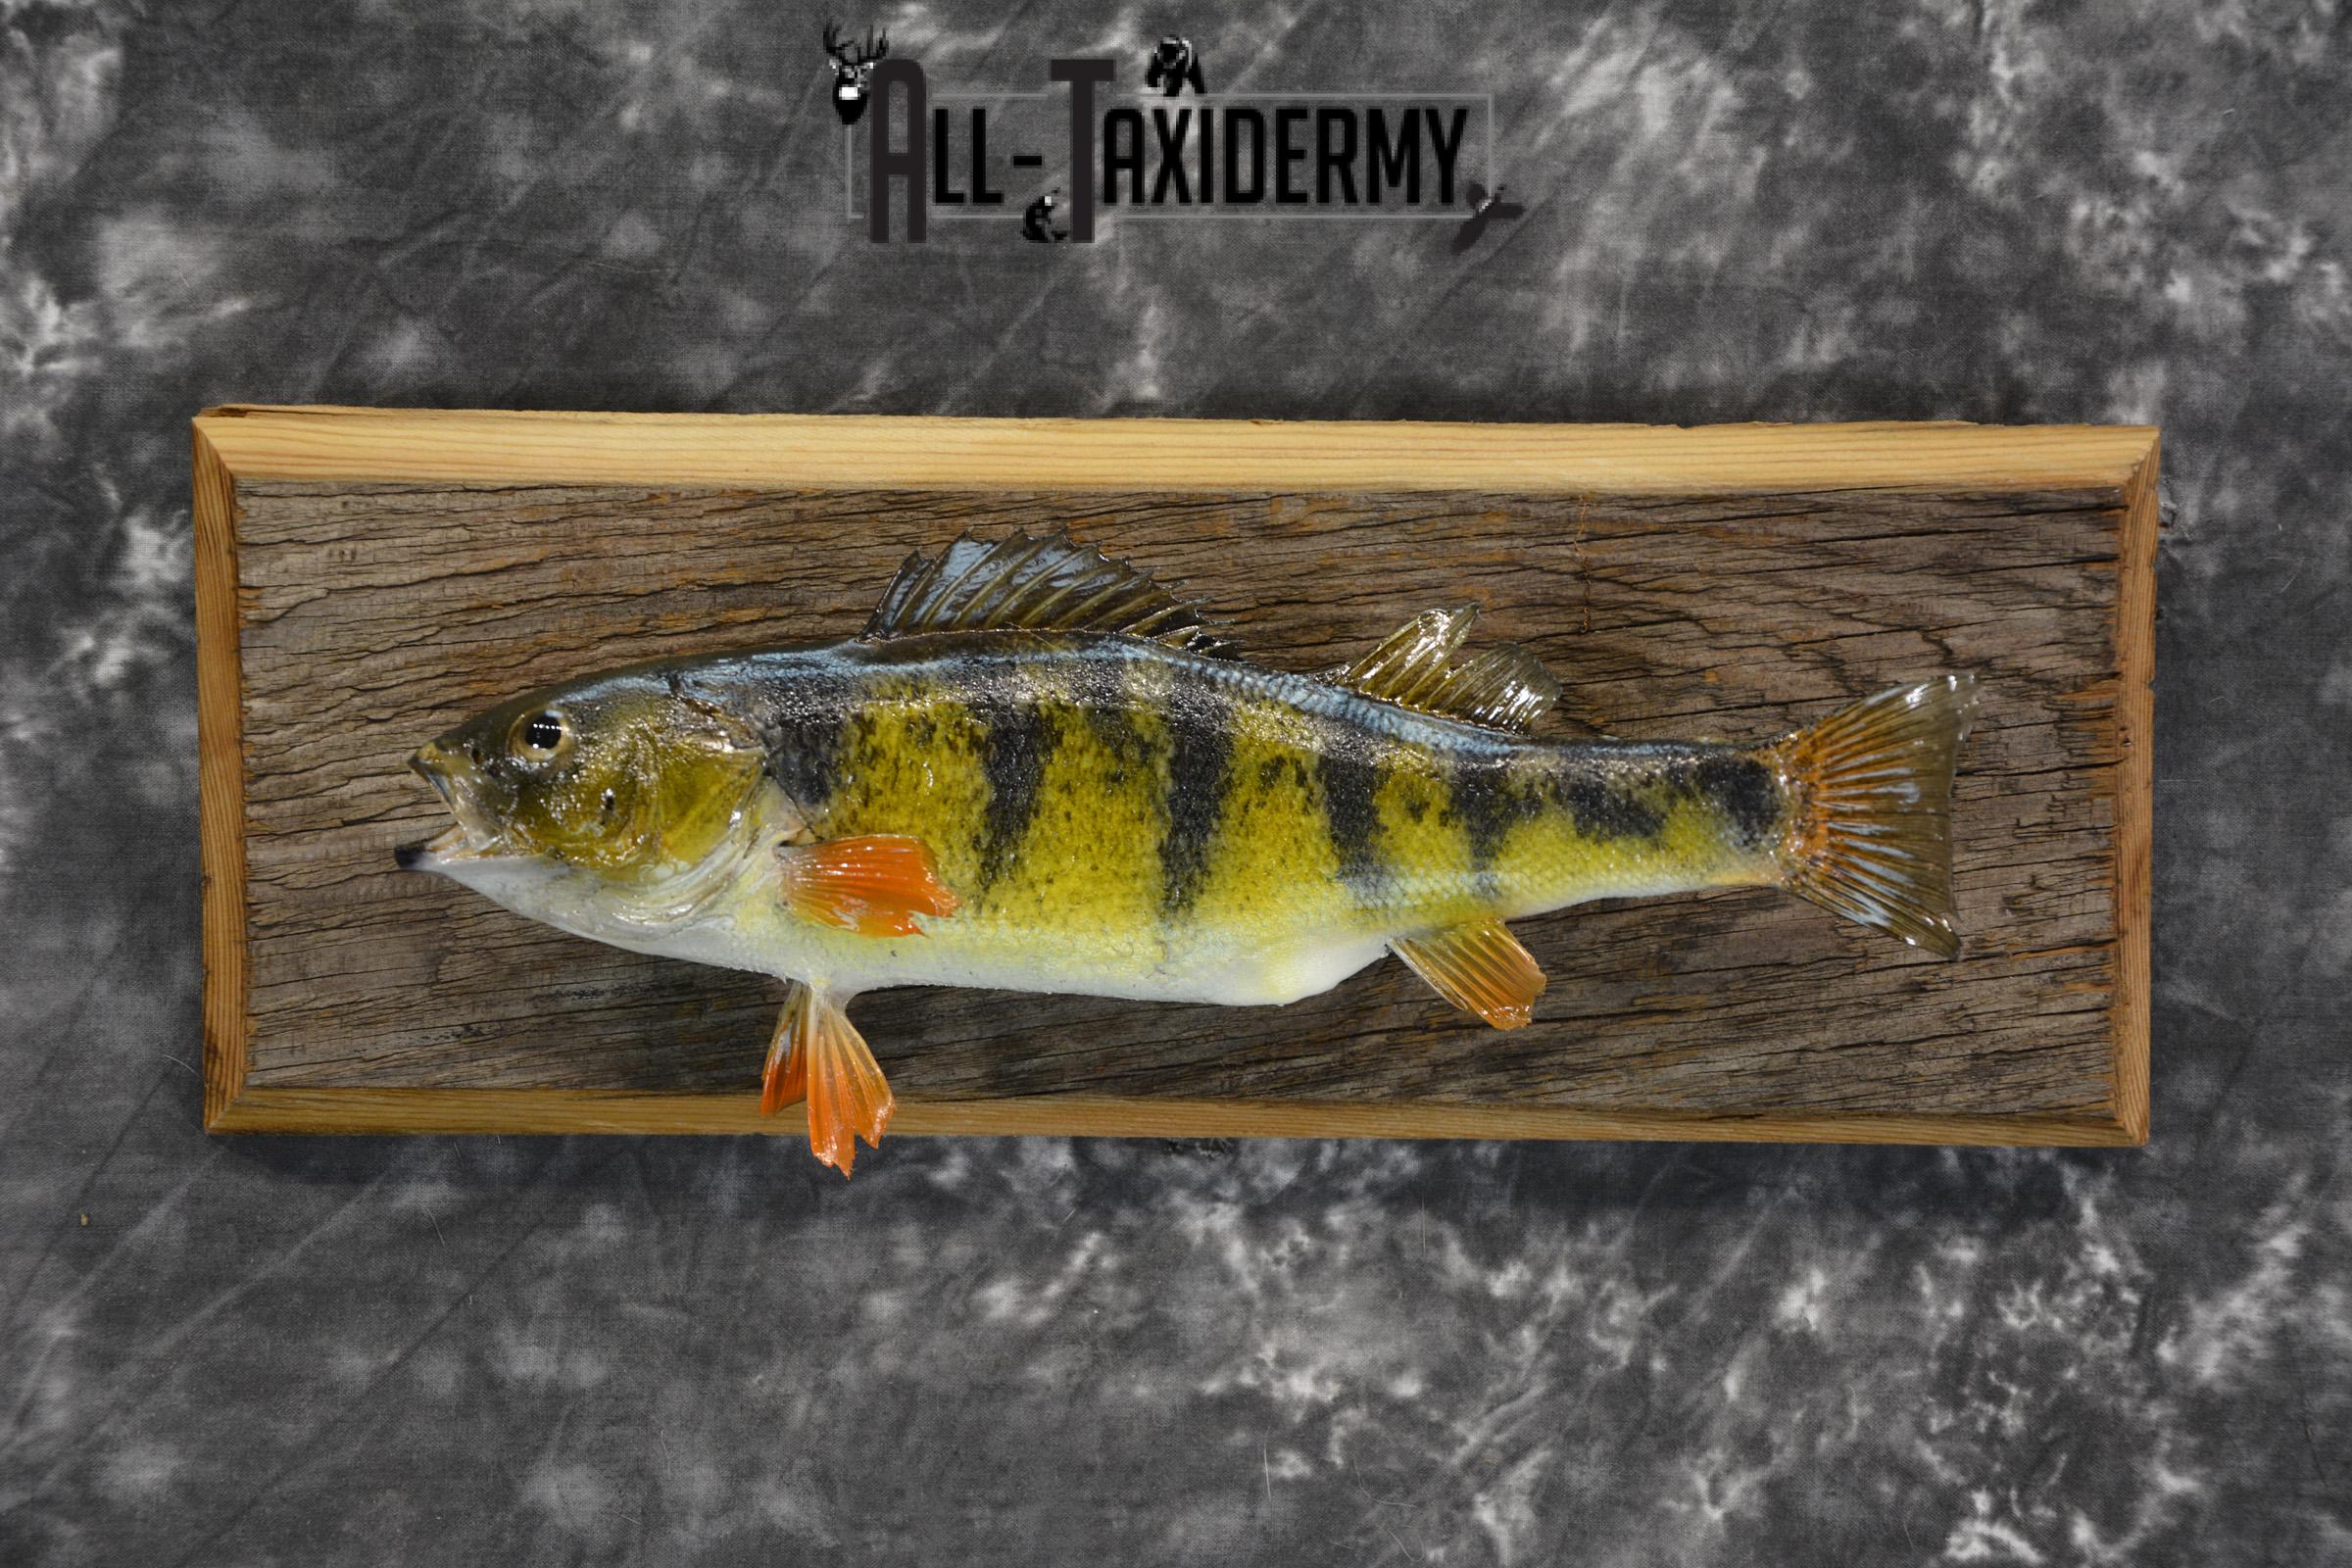 Perch Taxidermy fish mount for sale SKU 1852.1